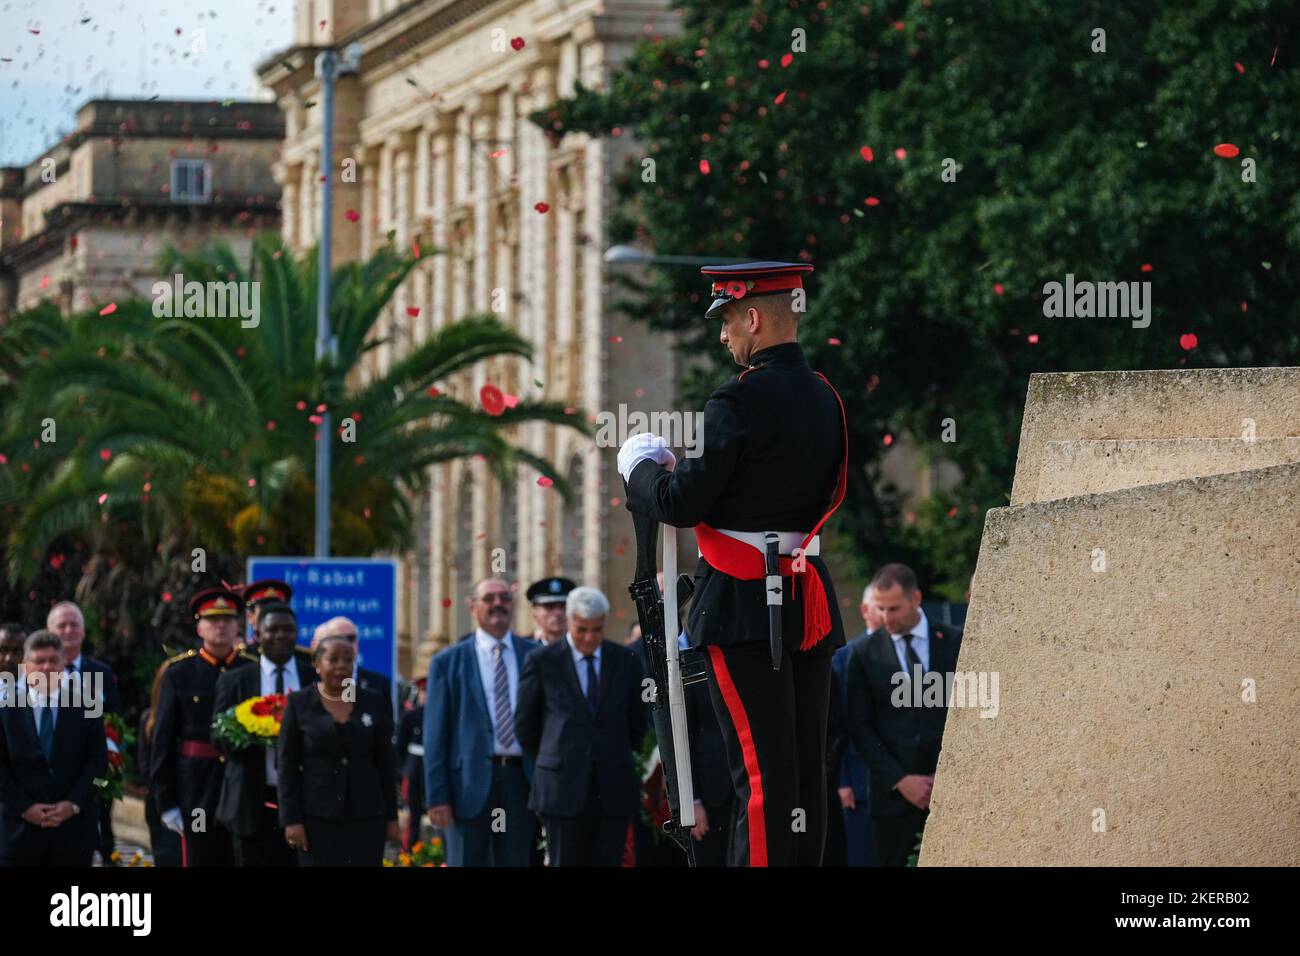 Floriana, Malta. 13th Nov, 2022. A soldier is seen during the Remembrance Day ceremony at the War Memorial in Floriana, Malta, Nov. 13, 2022. Malta marked Remembrance Day to salute the war dead on Sunday. Credit: Jonathan Borg/Xinhua/Alamy Live News Stock Photo